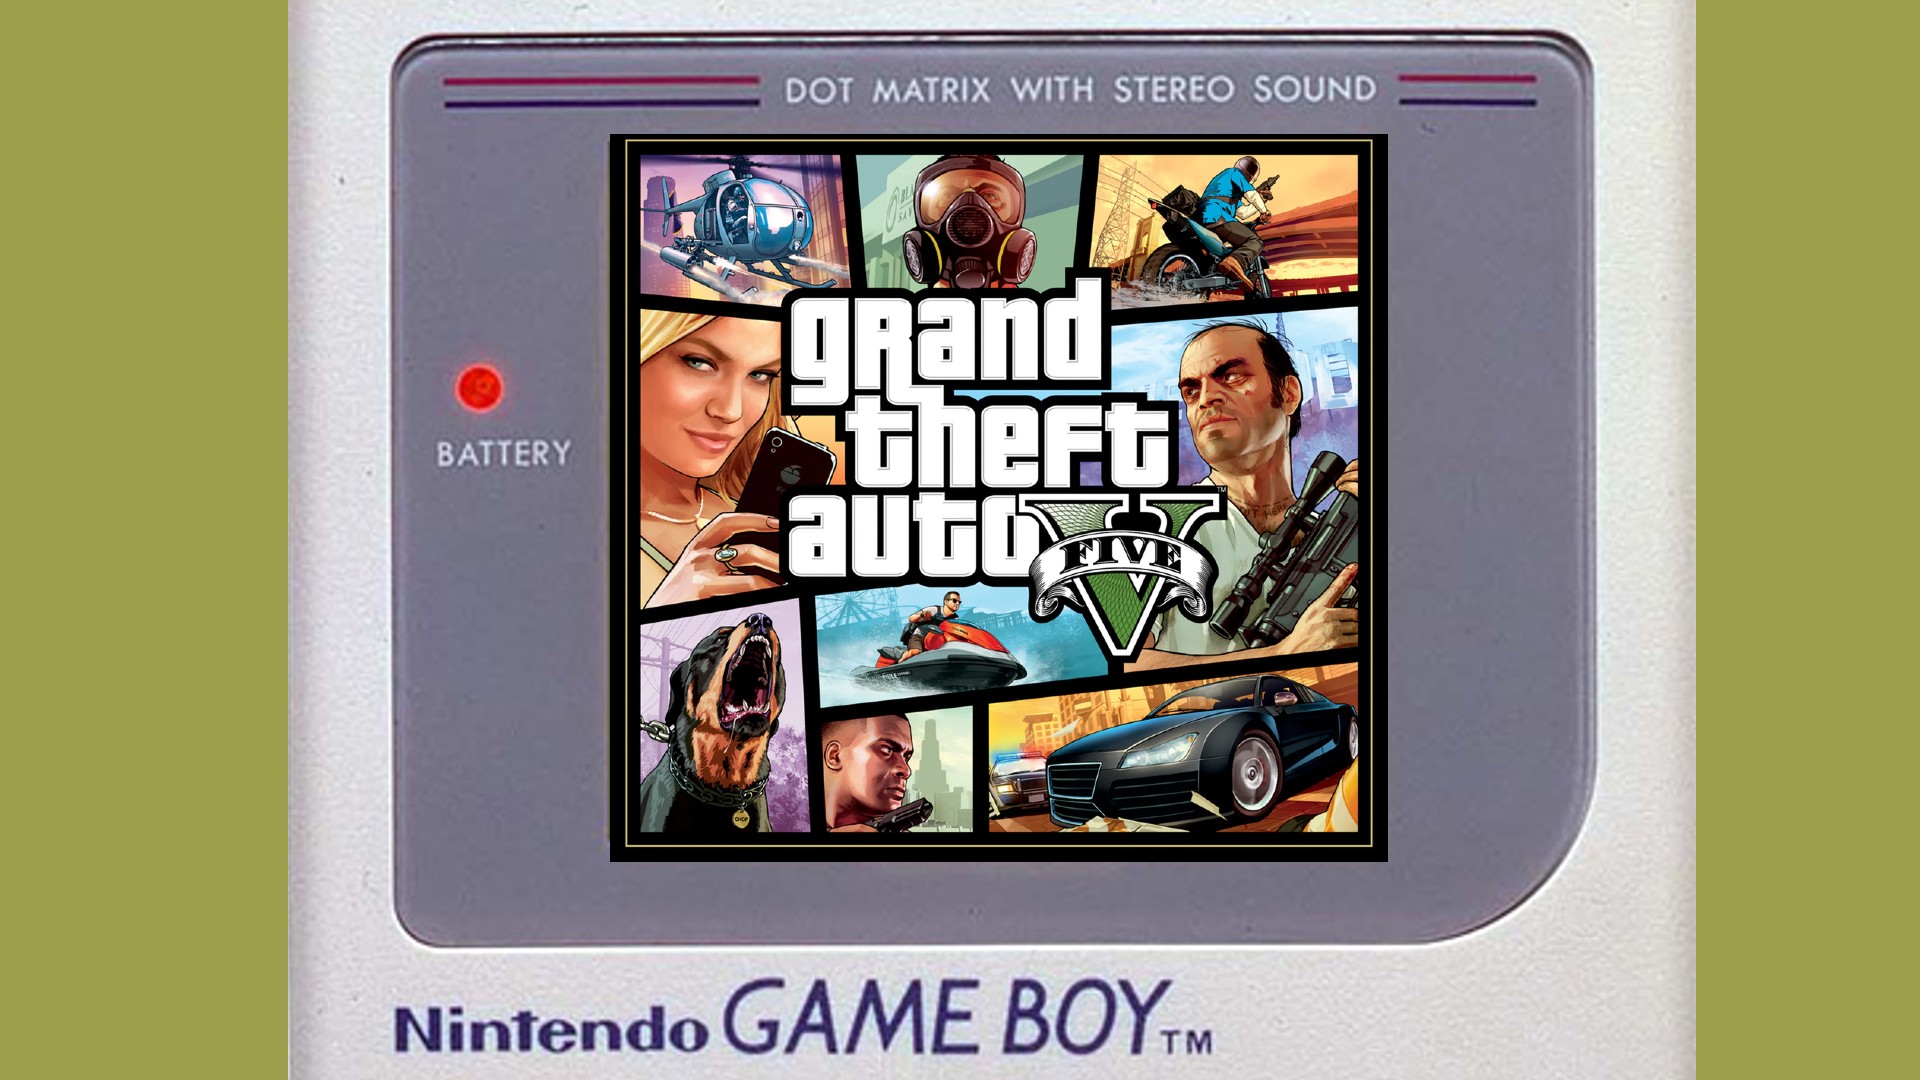 This is how GTA V would have looked on the Game Boy